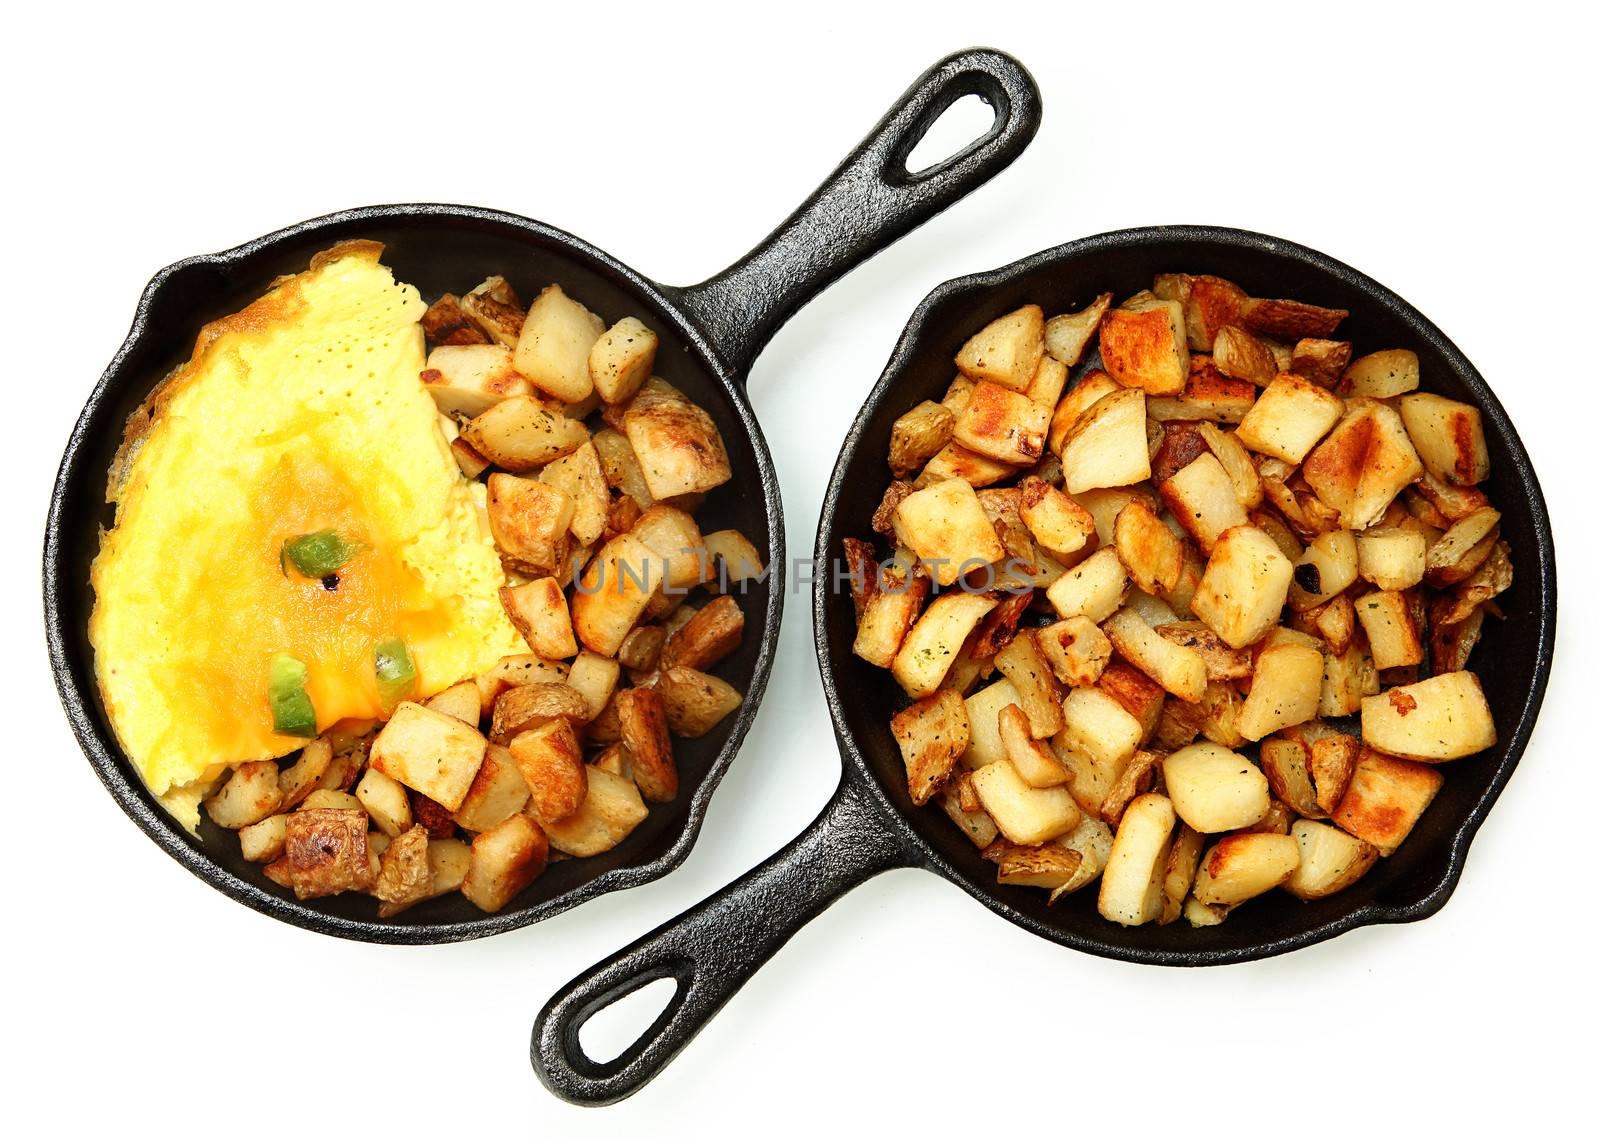 Denver Omelette and Ranch Potatoes in Cast Iron Skillet Isolated.